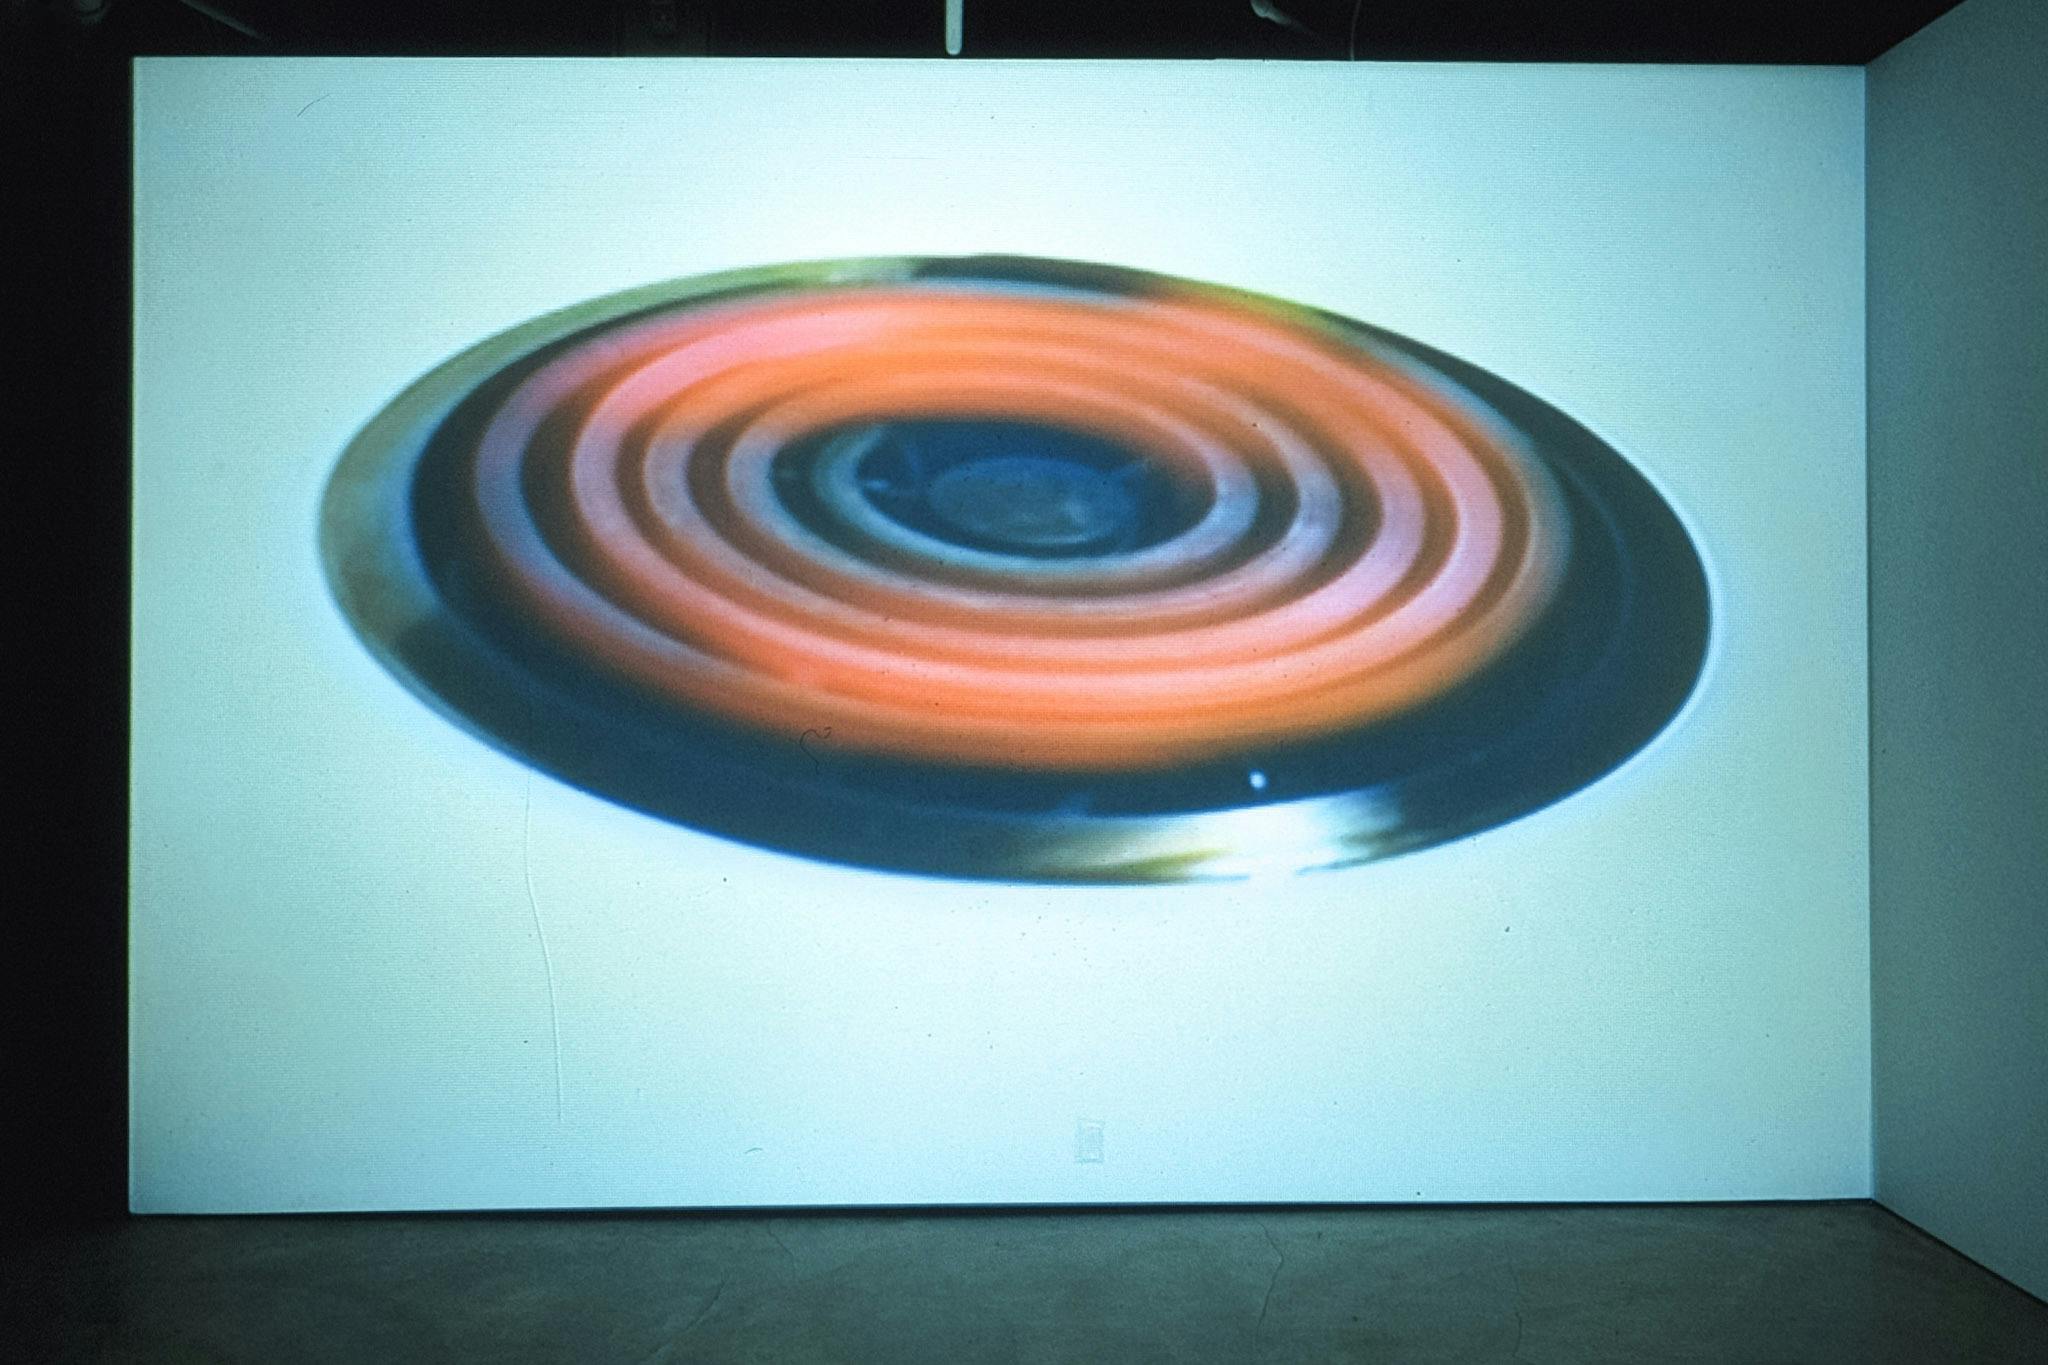 The large oval shape is projected on the white gallery wall. It is a cut-out image of an electric coil stove for cooking. The stove’s orange colour suggests that it is generating heat.